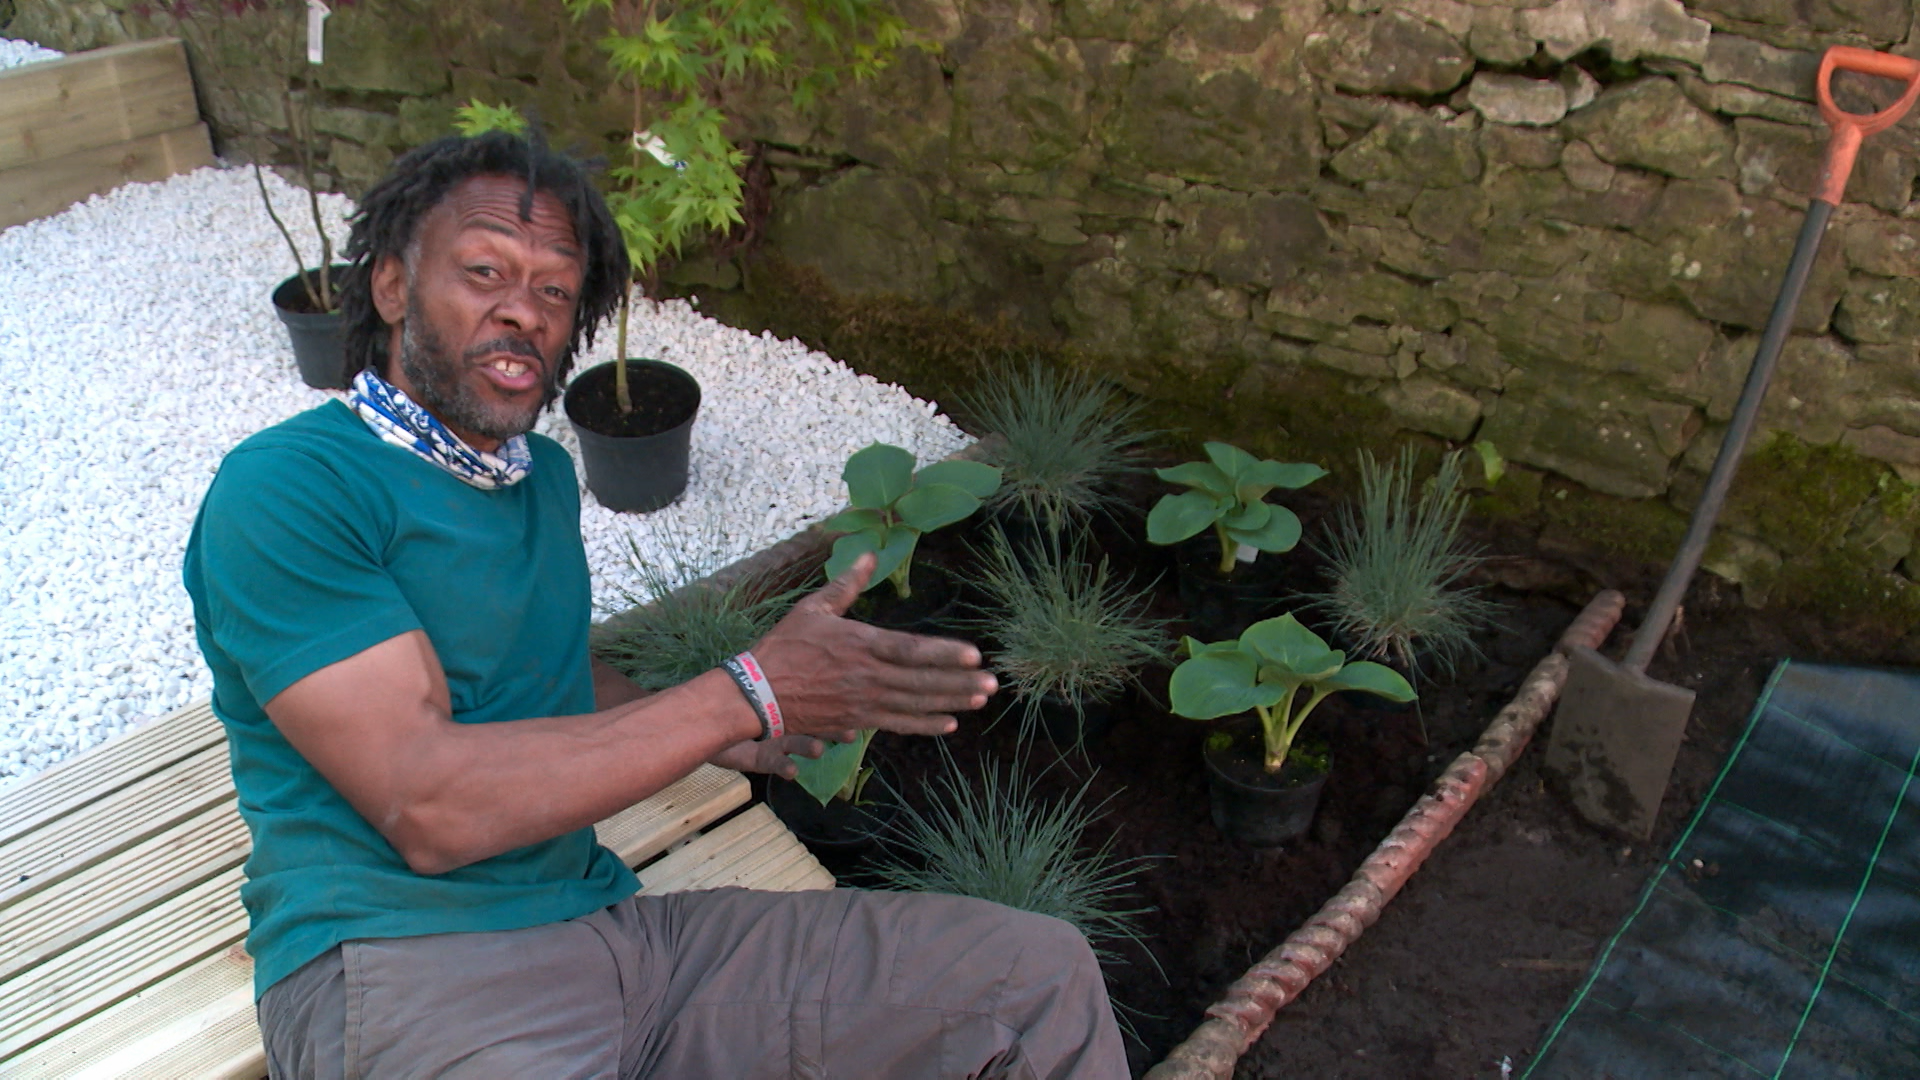 Danny Clarke lying on decking in a turquoise tshirt pointing to freshly planted shrubs in a patch. Behind him is white gravel and two potted plants. On the right is a brick wall.